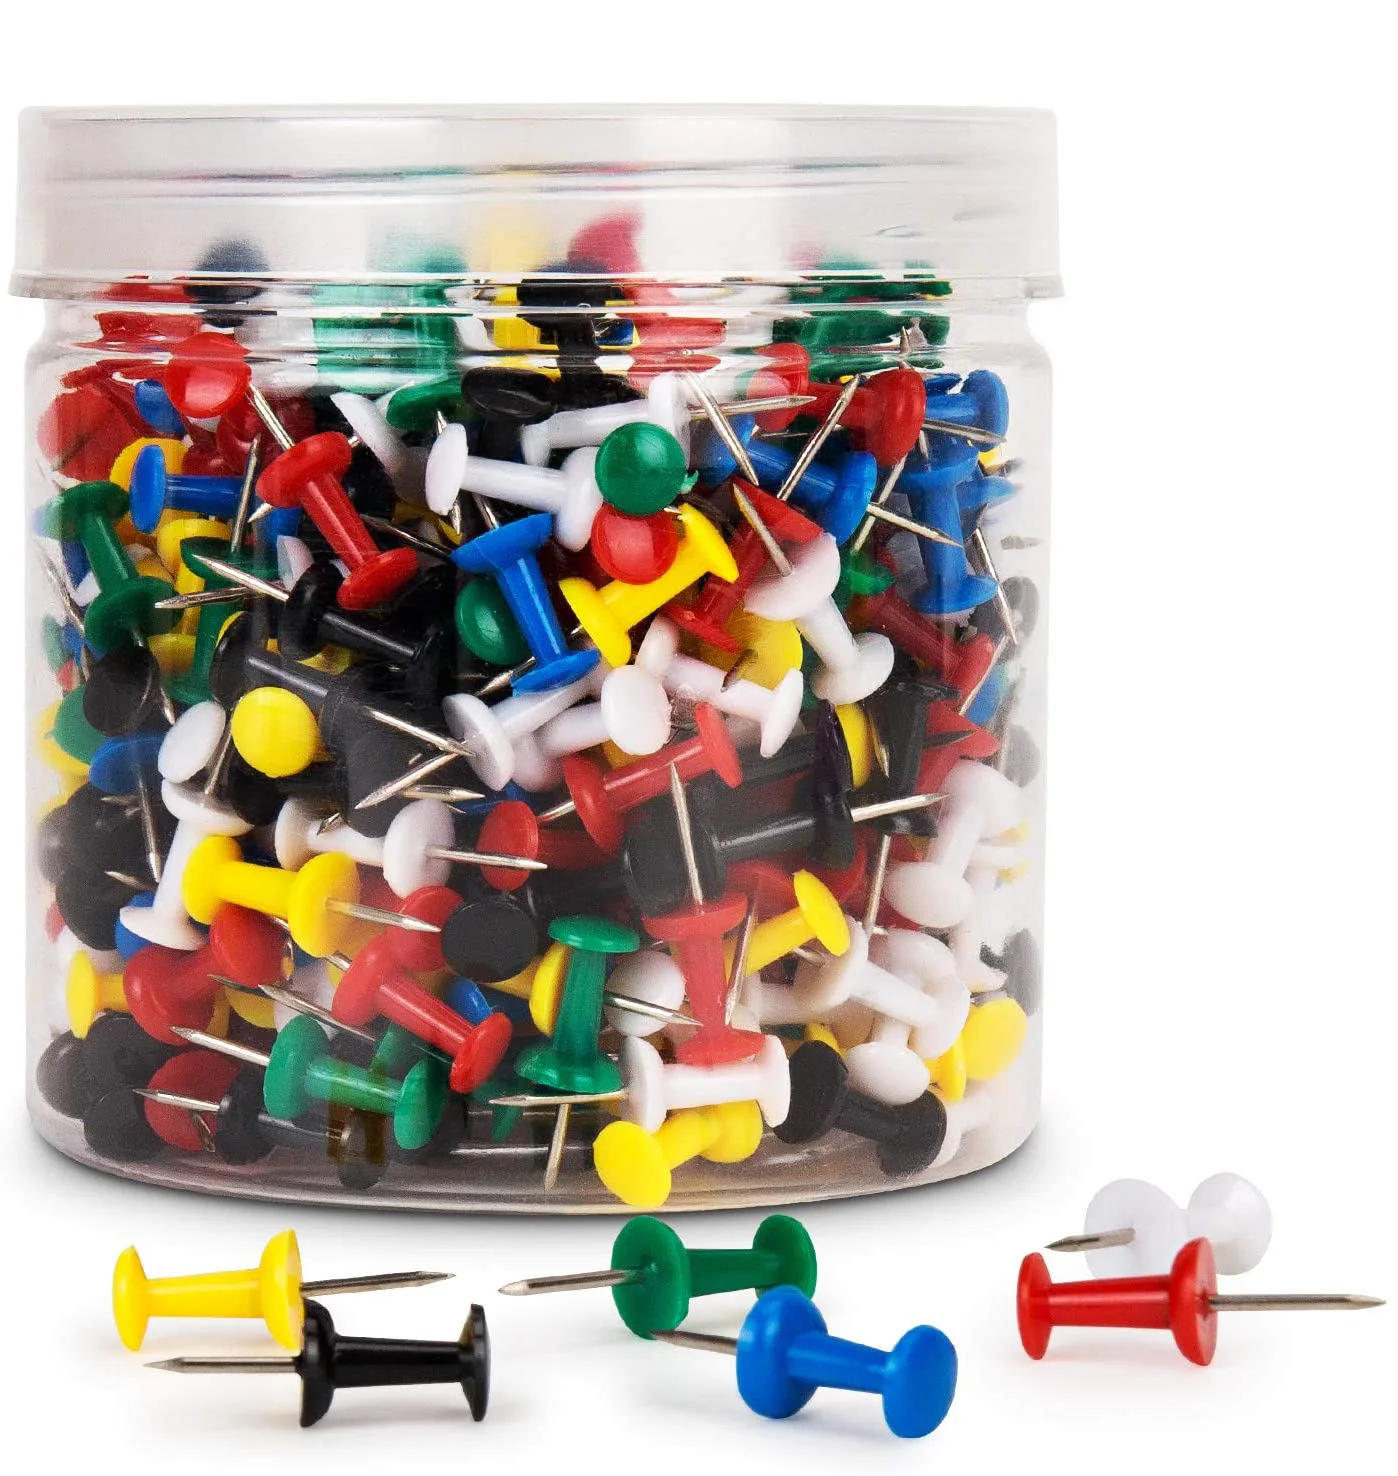 Assorted Color I Shaped Push Pins With Steel Point &Solid Color Head In Pack Of 500Pcs (62050351971)